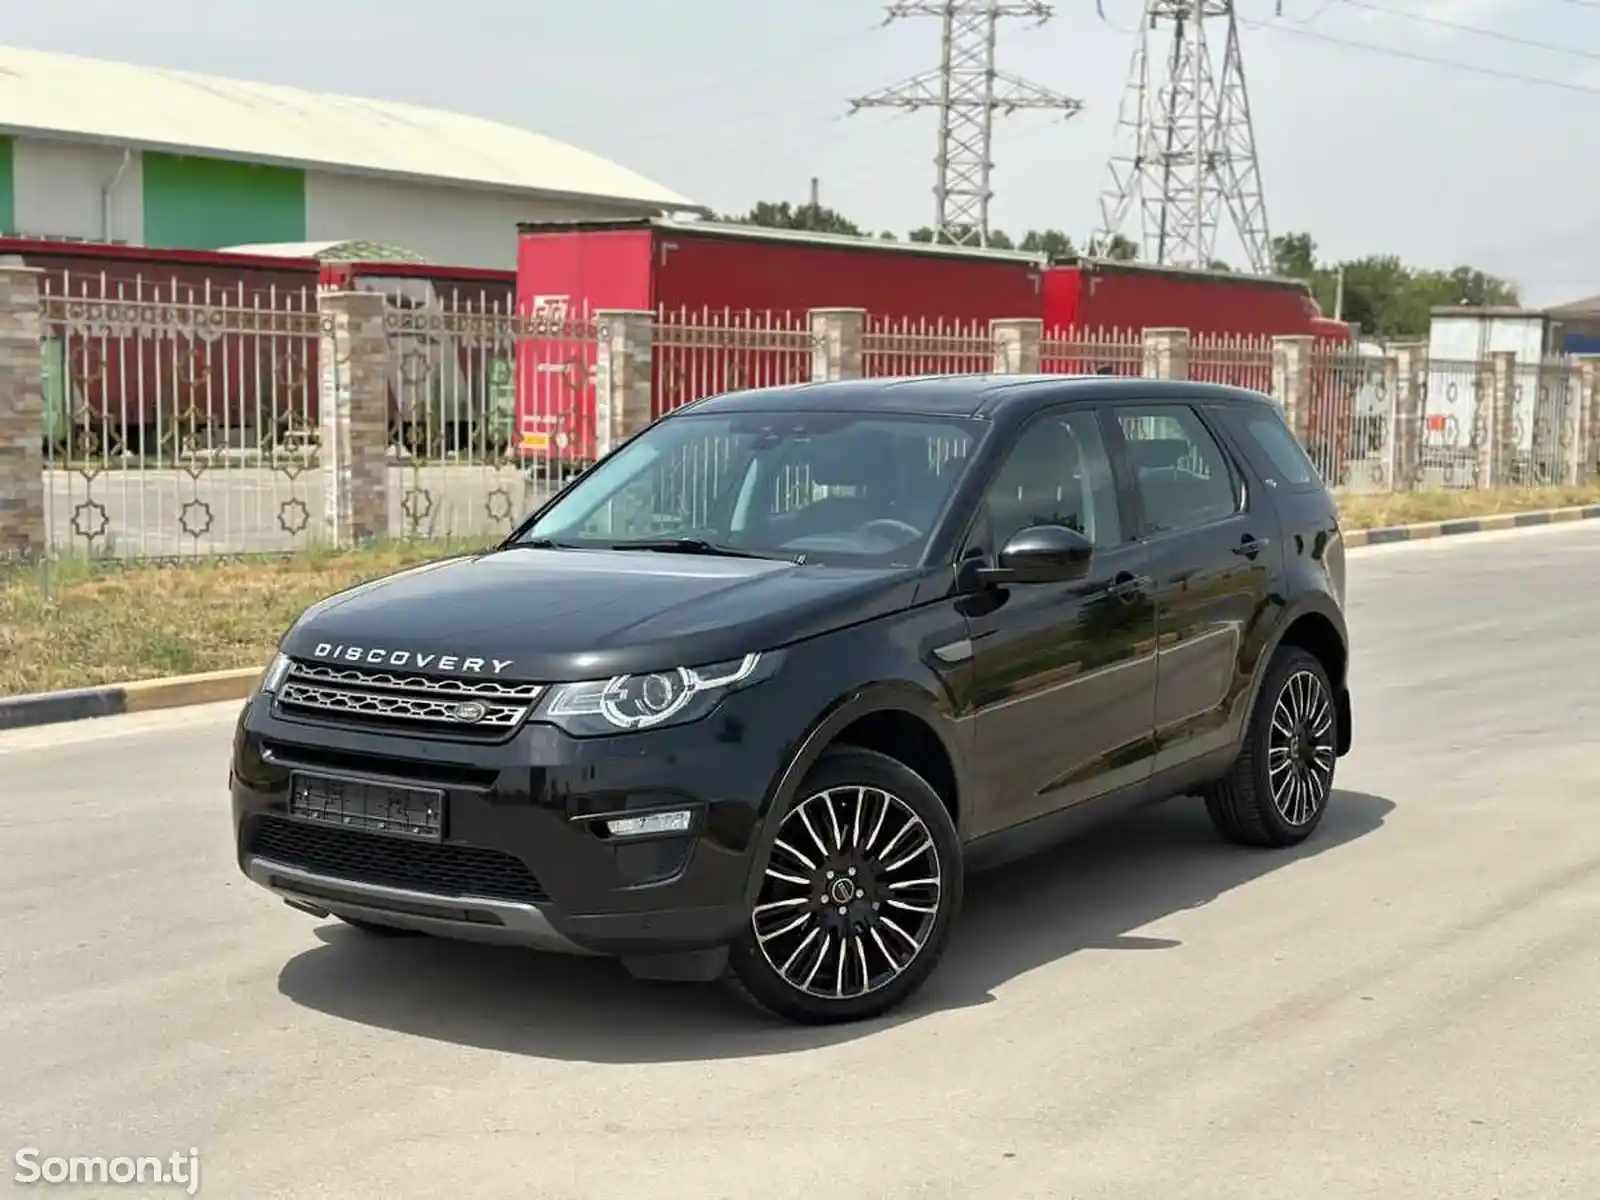 Land Rover Discovery, 2018-2